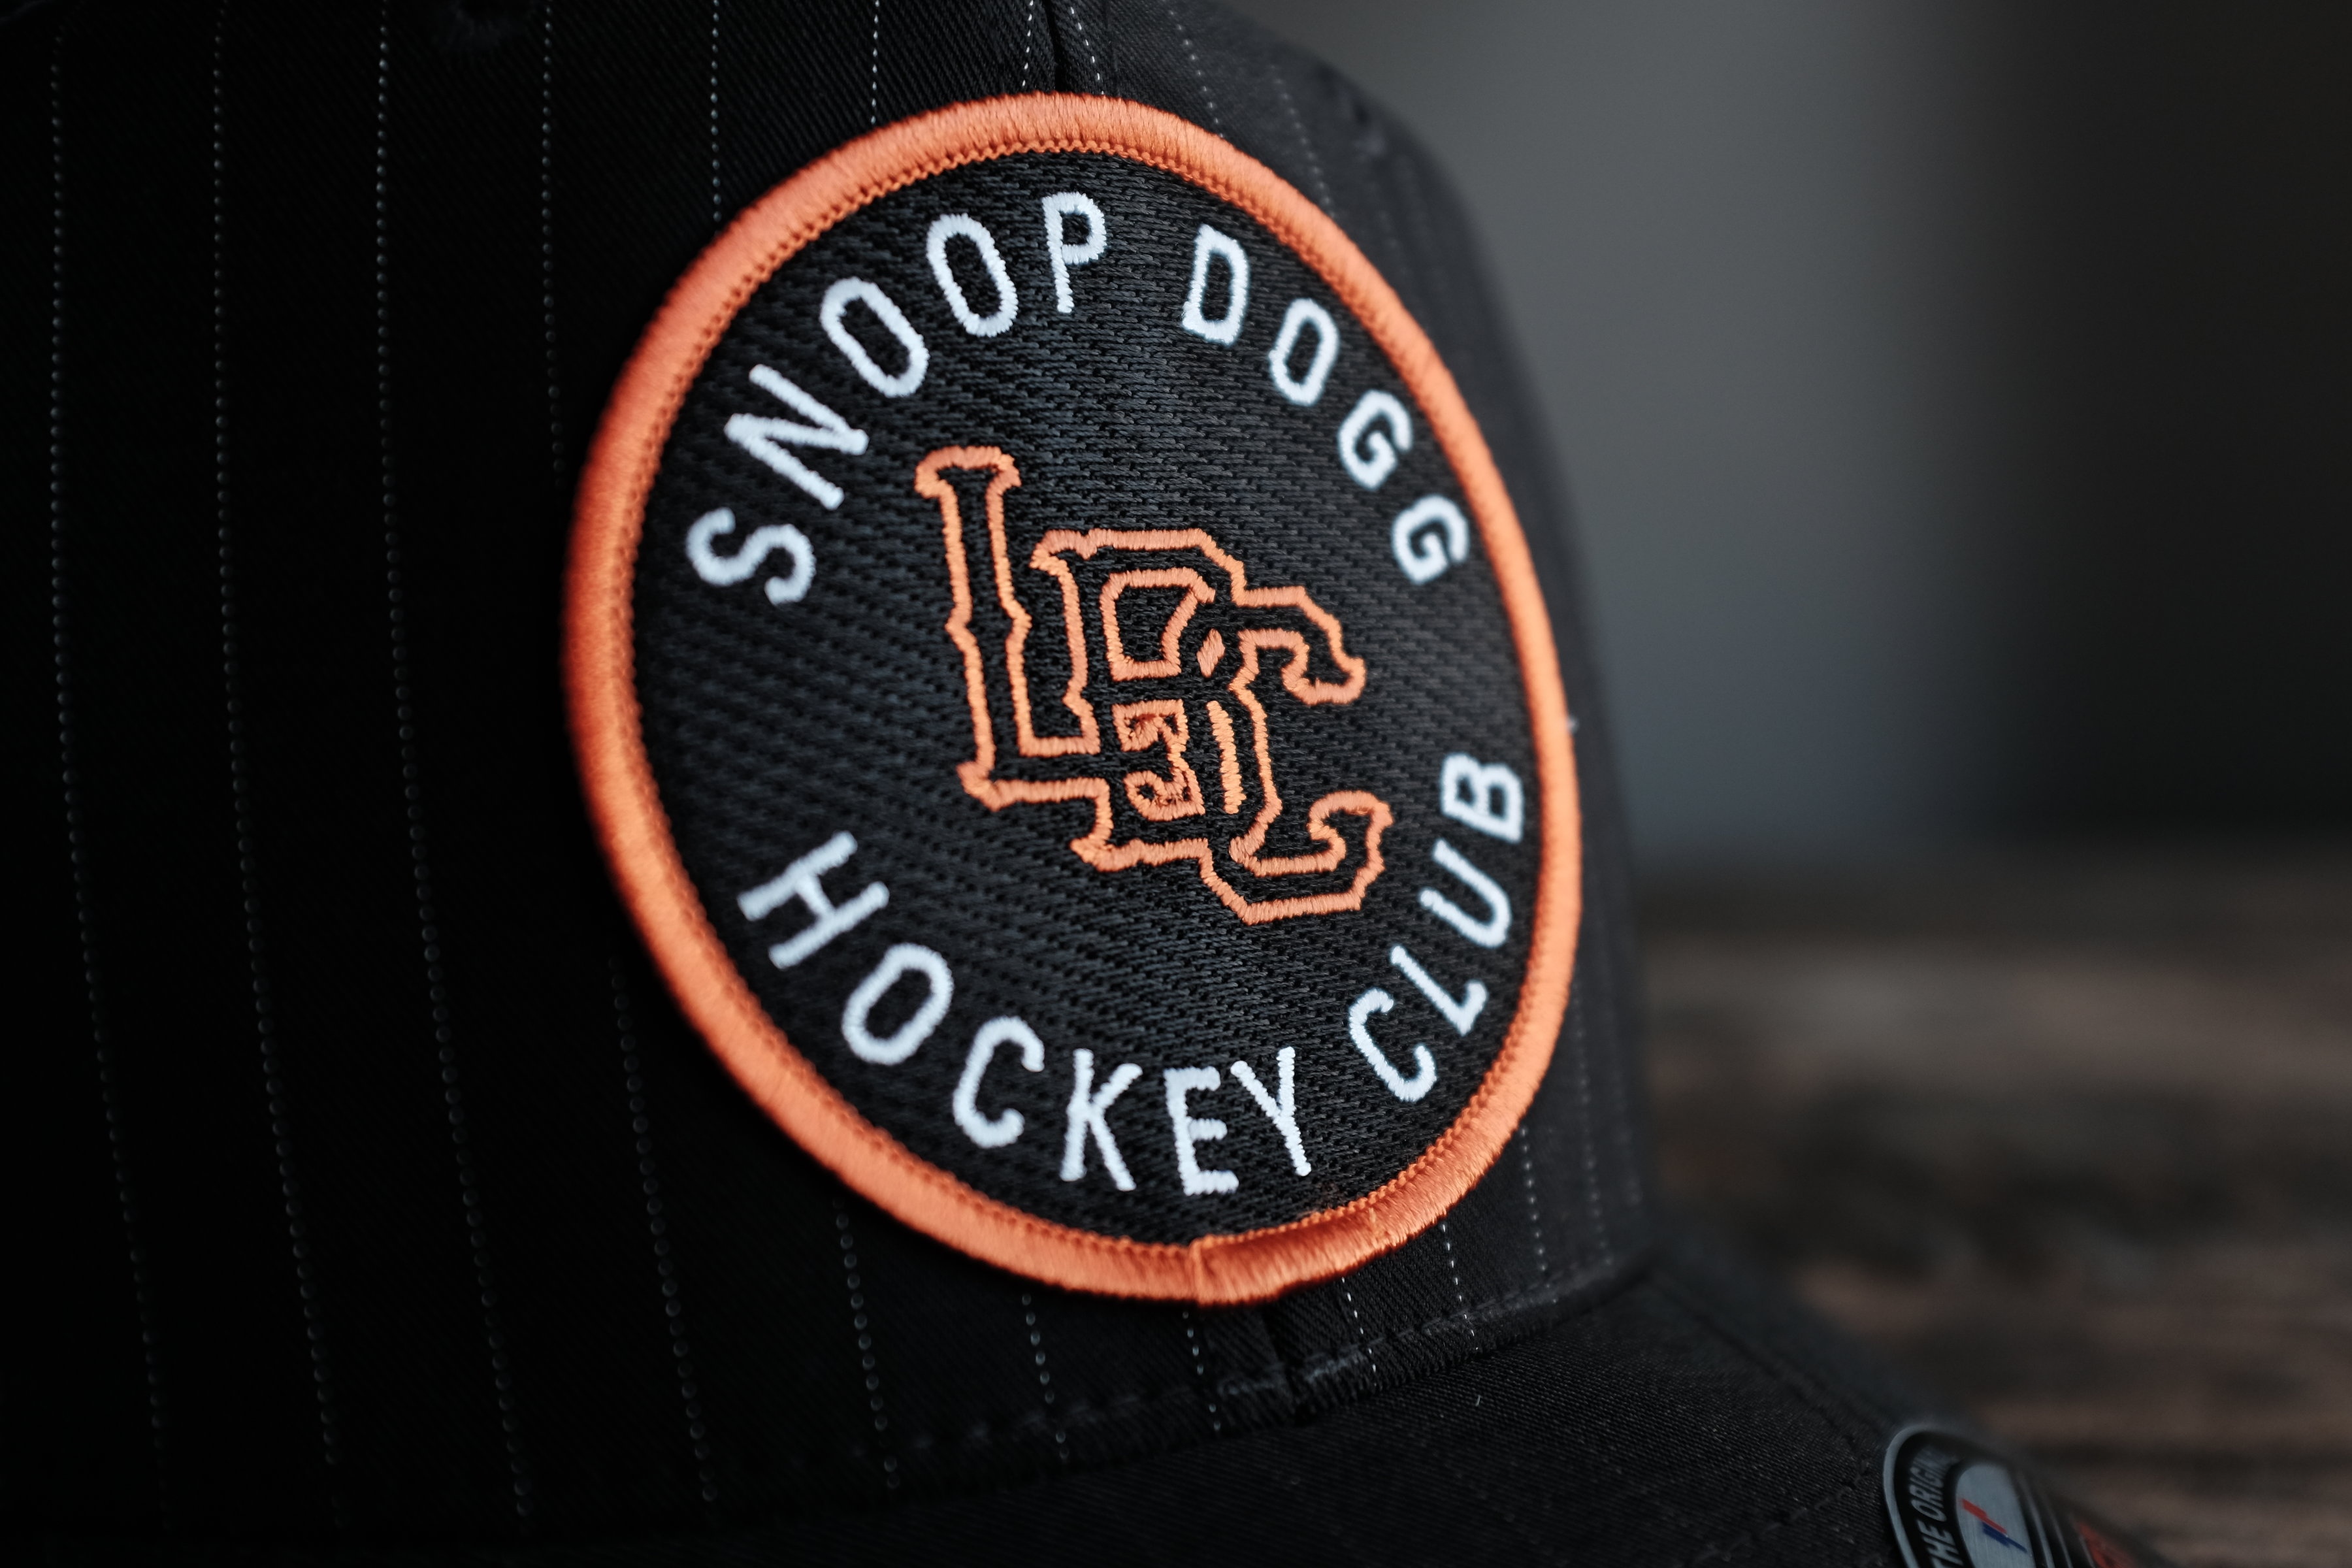 The origin of Snoop Dogg's awesome 'Snoop Dogg Hockey Club' hat and the  story behind it - Article - Bardown